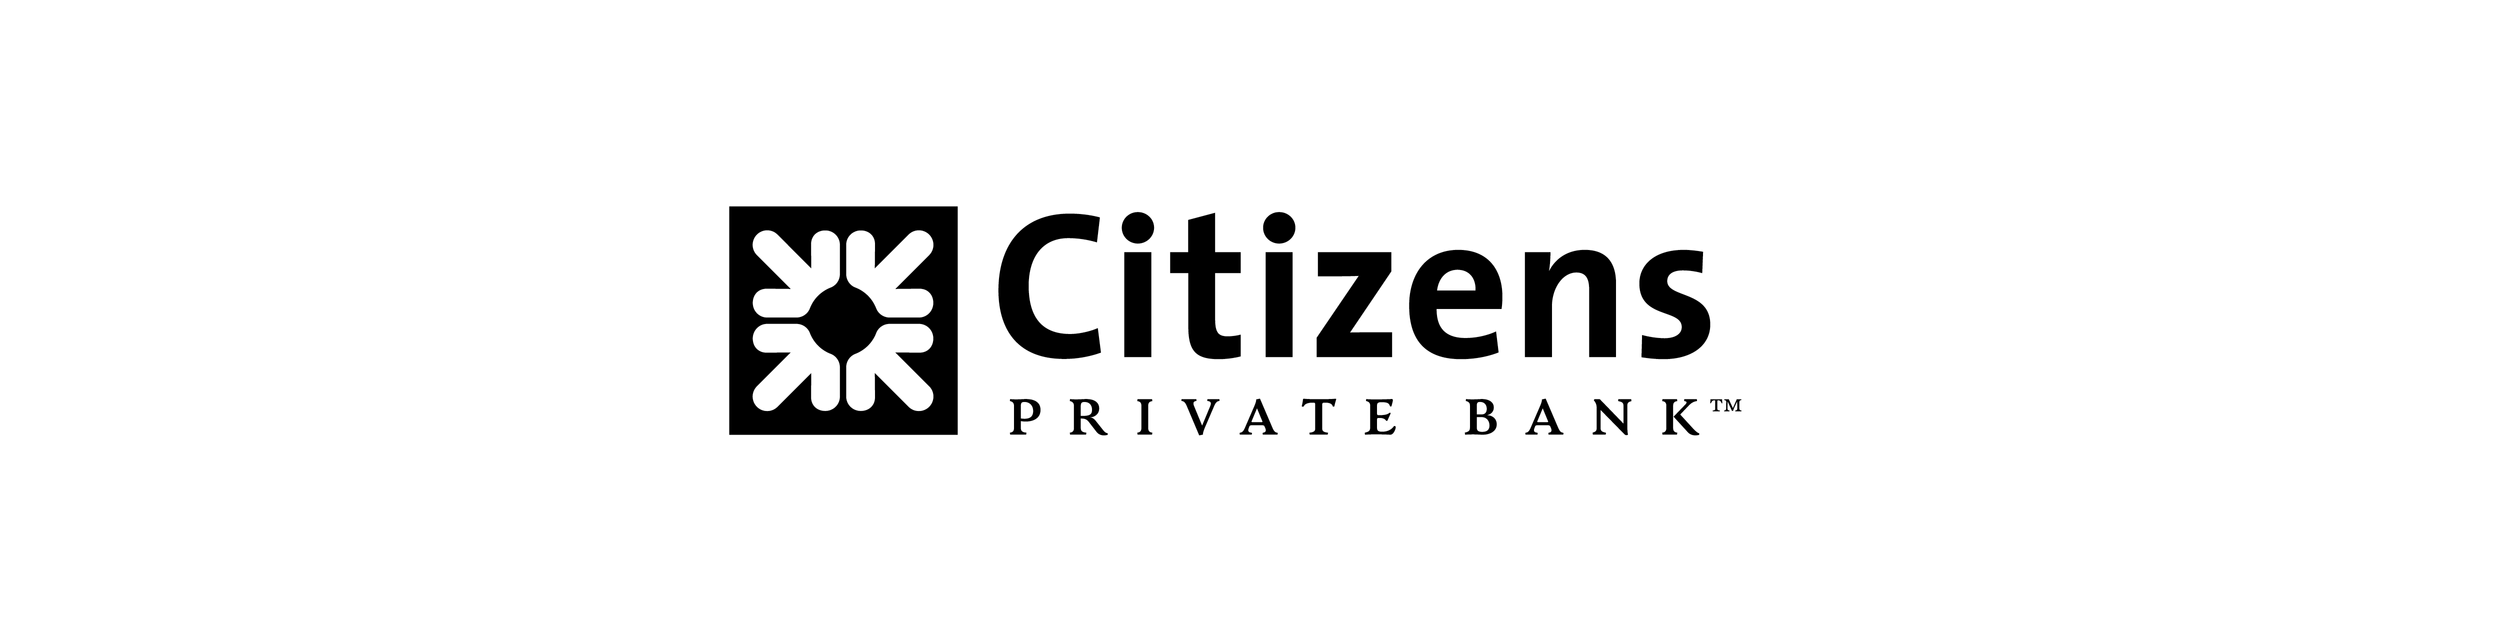 Covergence_1200x300_sponsors_premium_citizensprivate.png